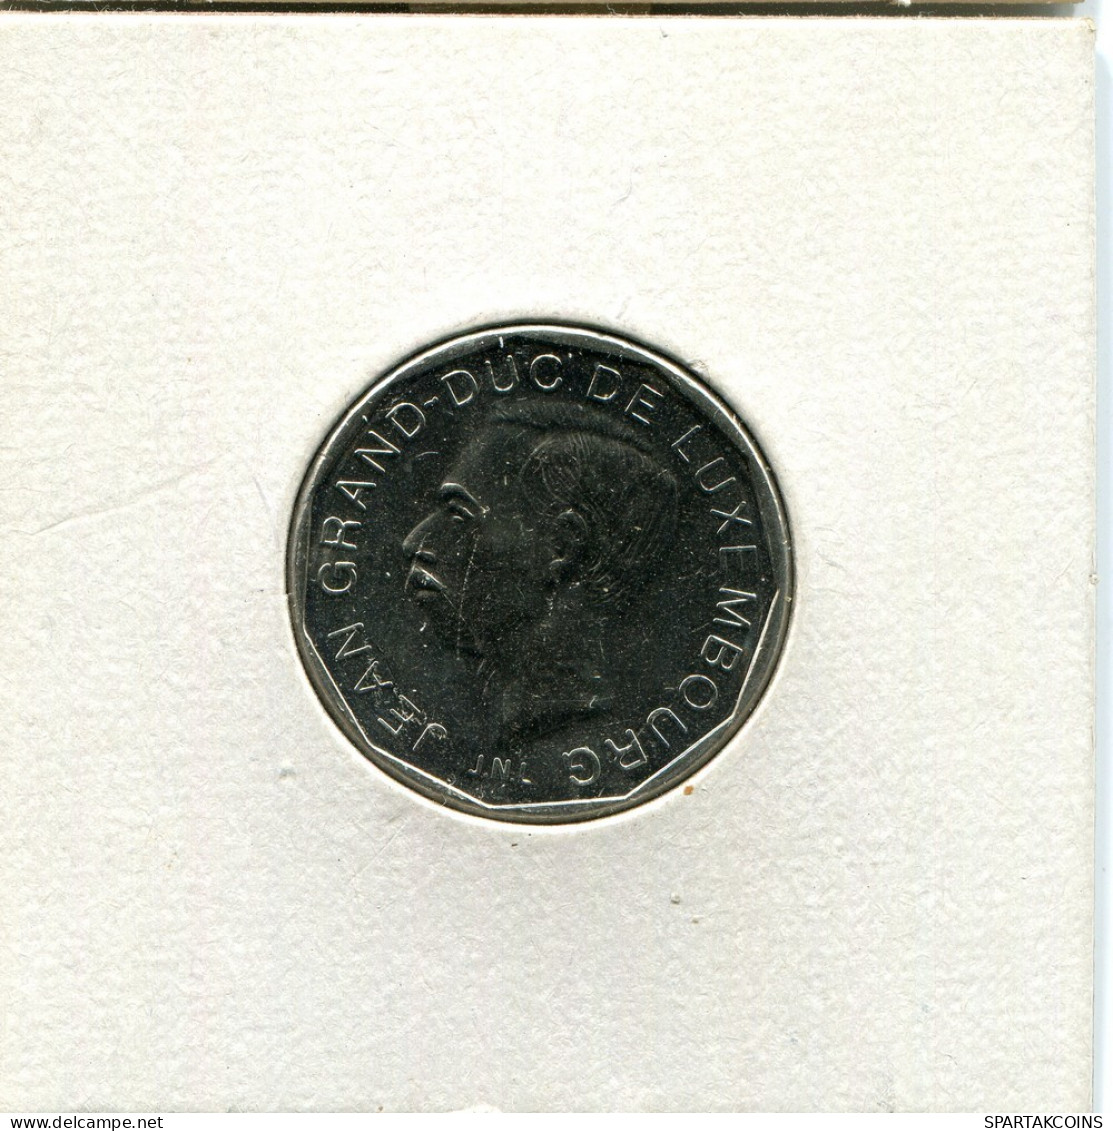 50 FRANCS 1990 LUXEMBURG LUXEMBOURG Münze #AT253.D.A - Lussemburgo